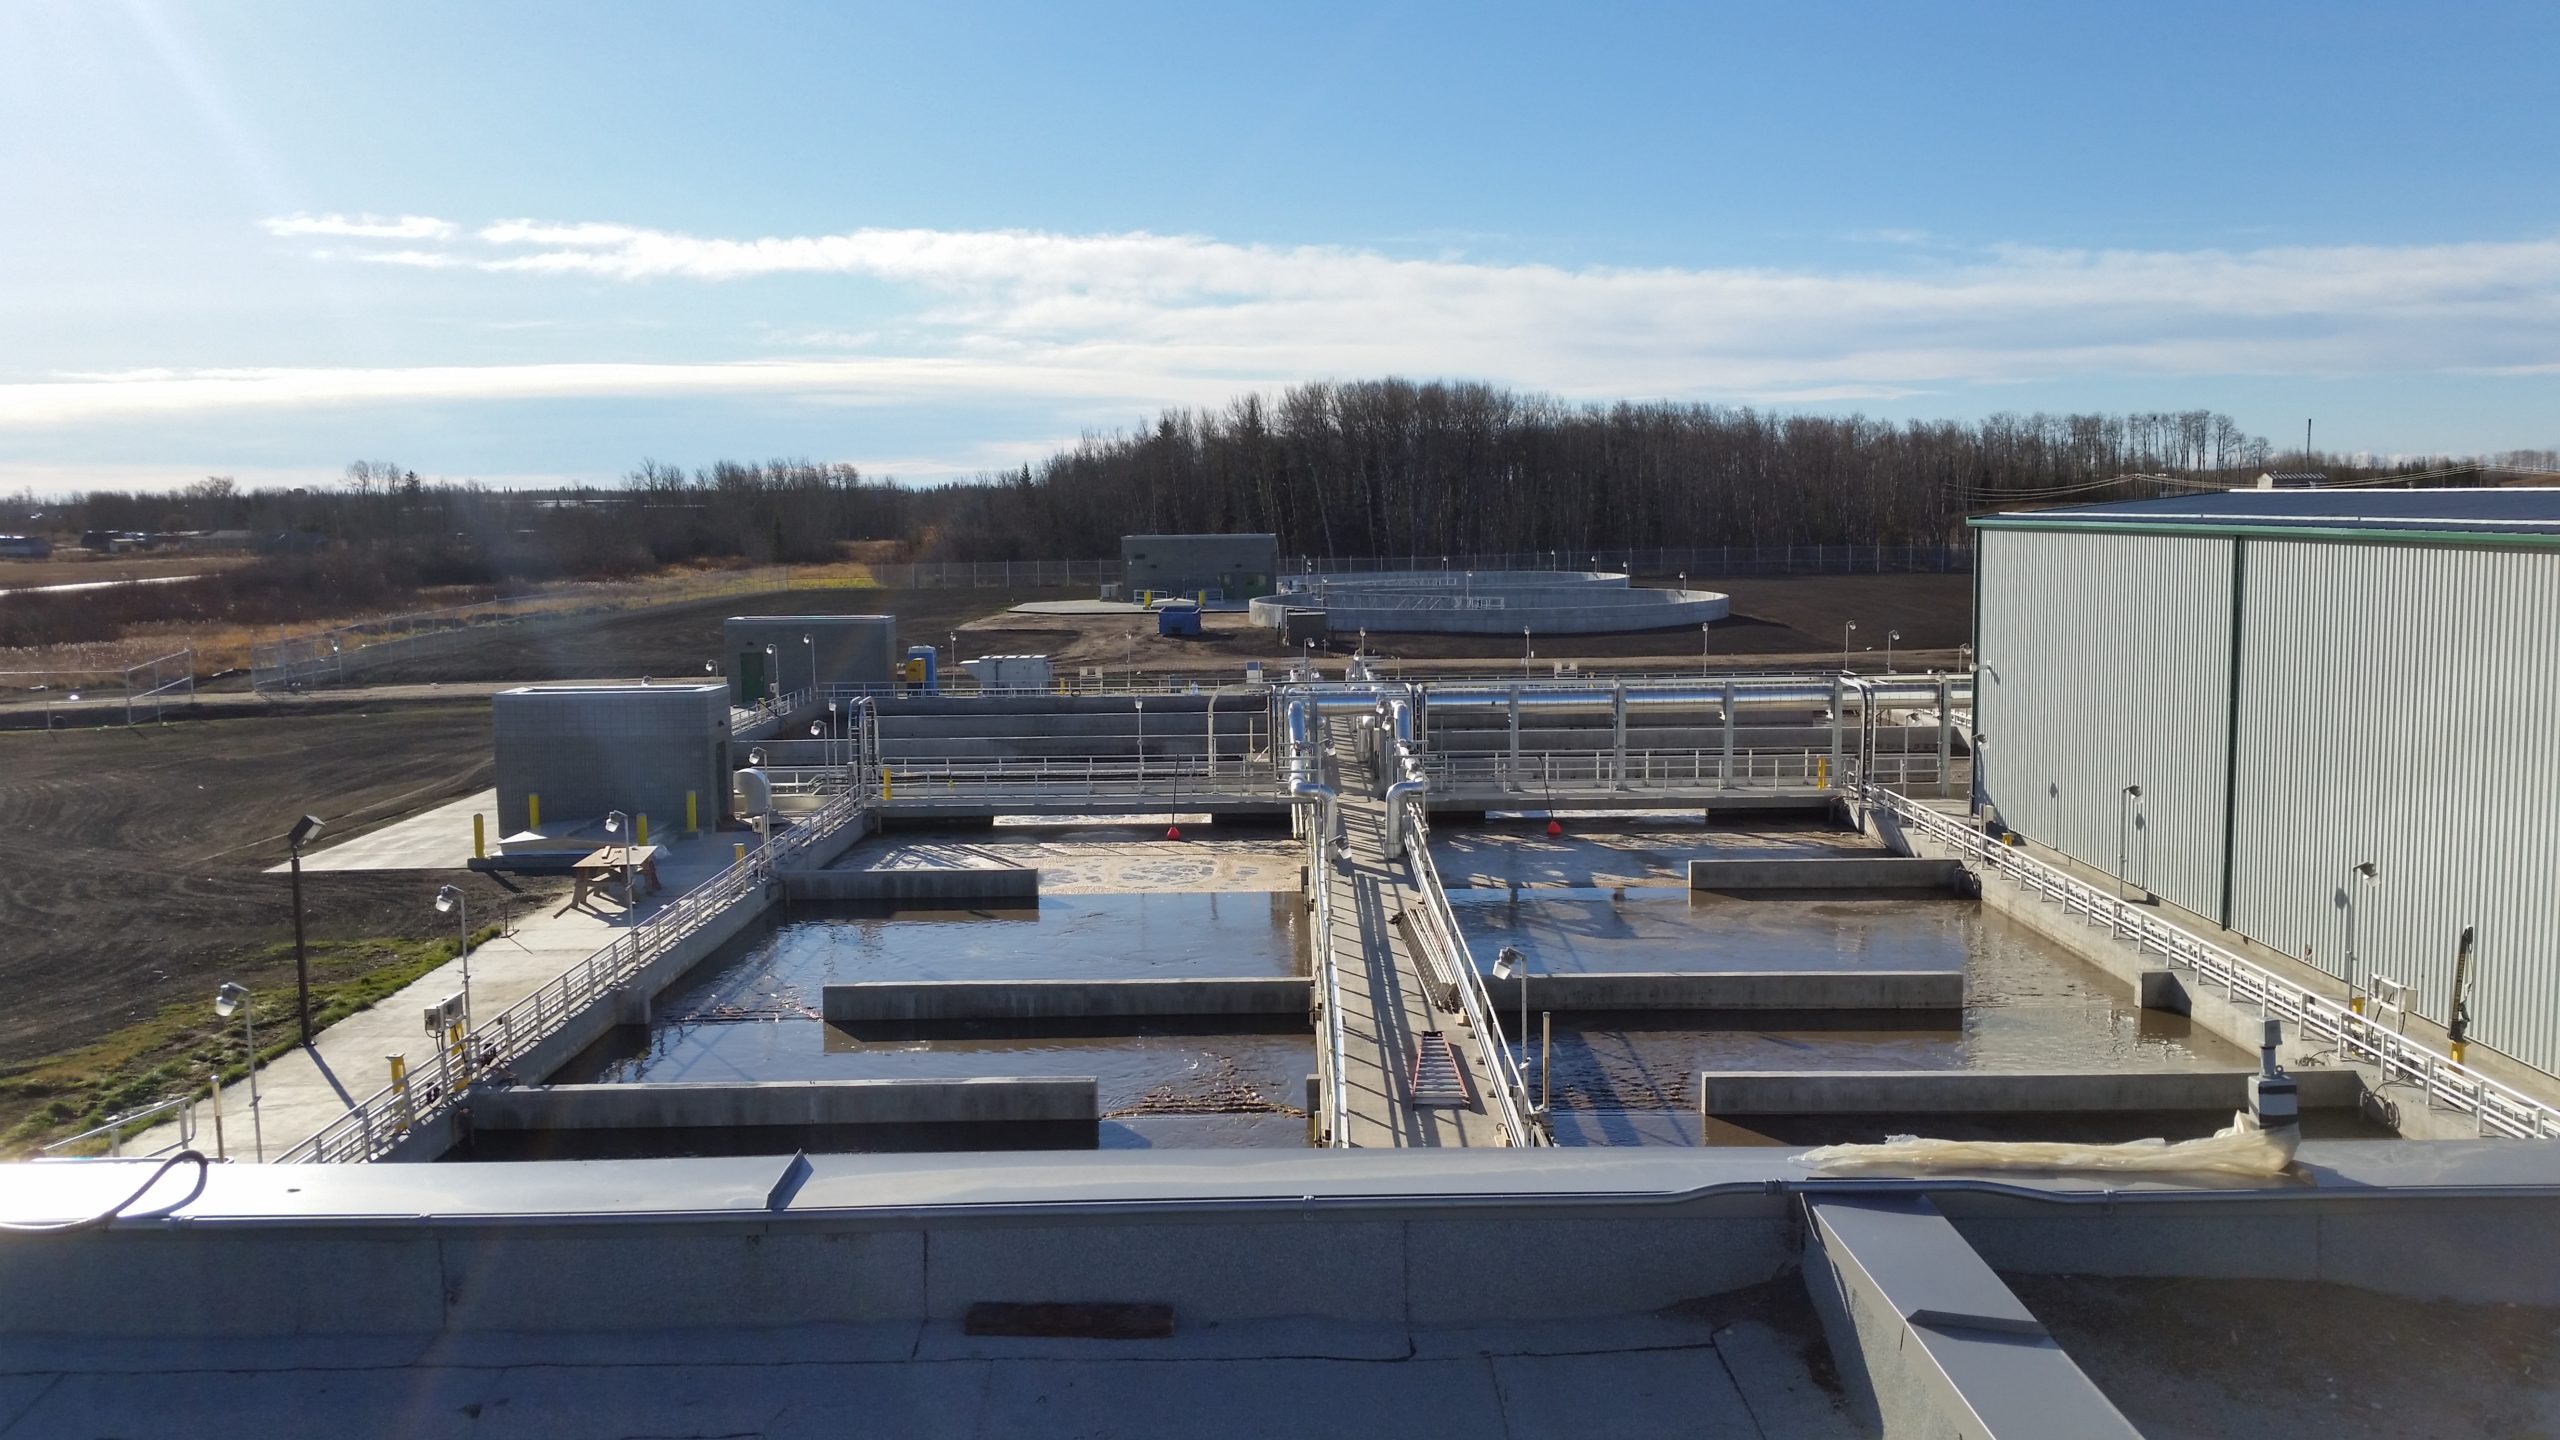 Water can be seen being treated in Aquatera's wastewater treatment plant.